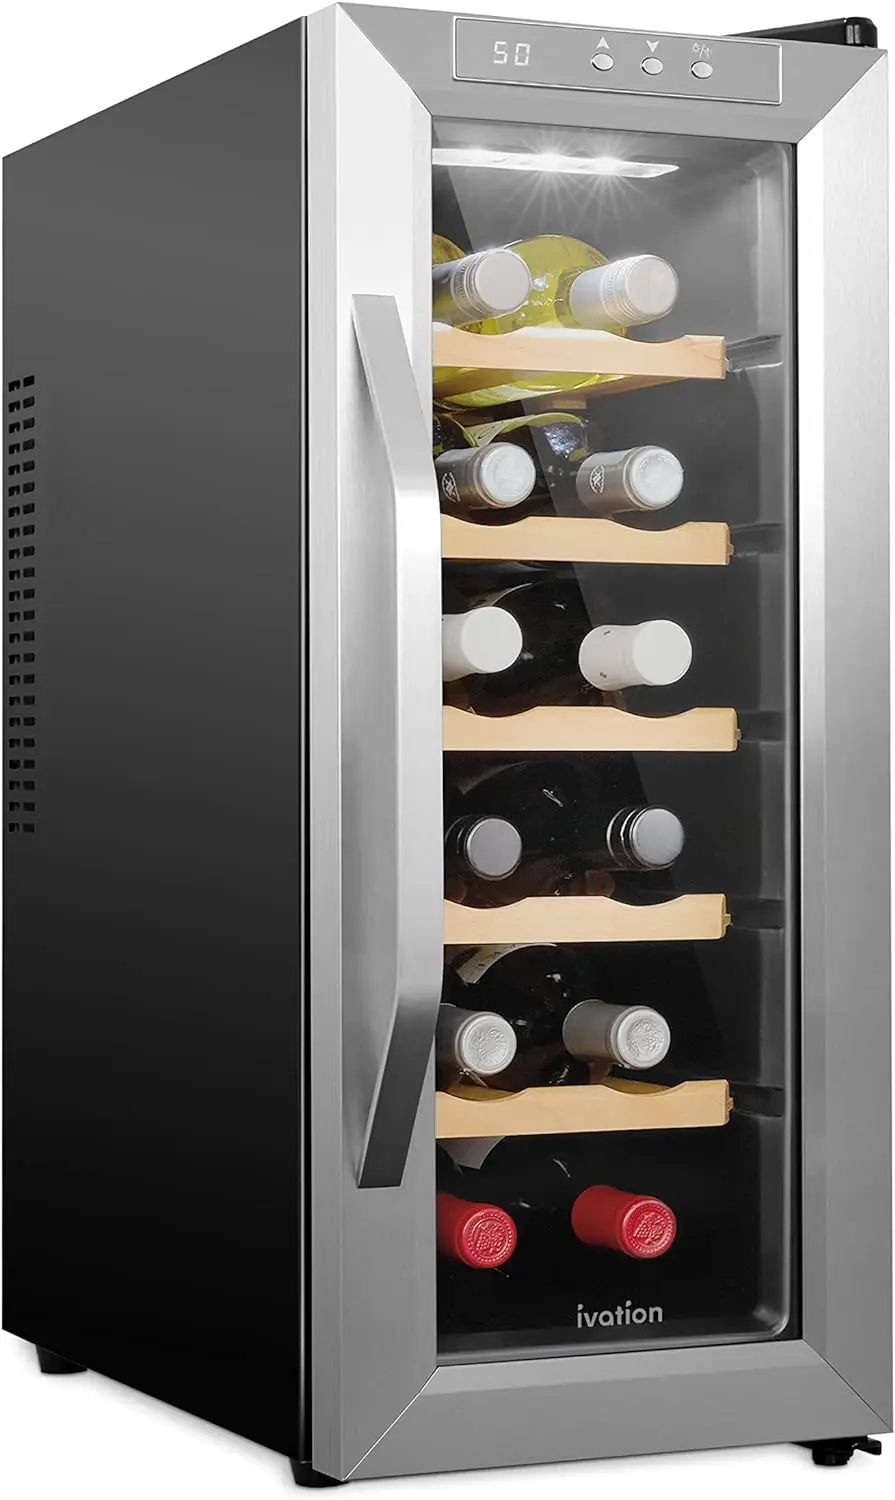 

12 Bottle Thermoelectric Wine Cooler/Chiller - Stainless Steel - Counter Top Red & White Wine Cellar w/Digital Temperature, Min